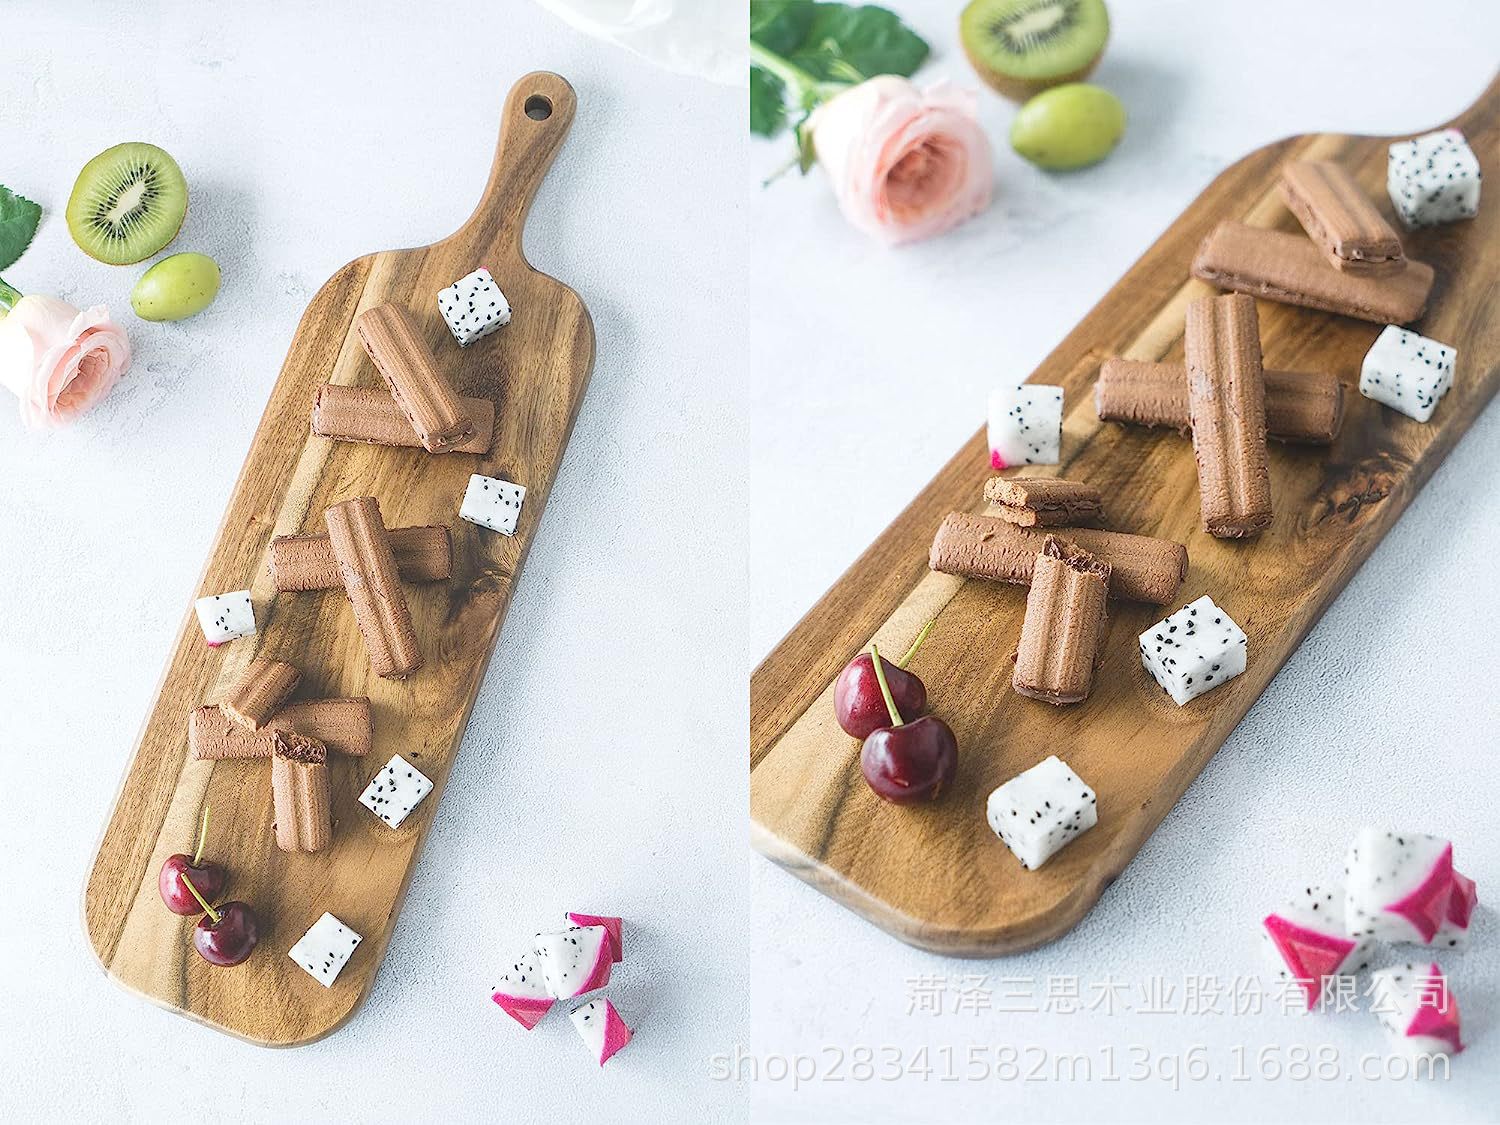 Wooden Cutting Board Cutting Board Thickened Household Kitchen Utensils Cutting Board Solid Wood Cutting Board Chopping Block Panel Wooden Chopping Board